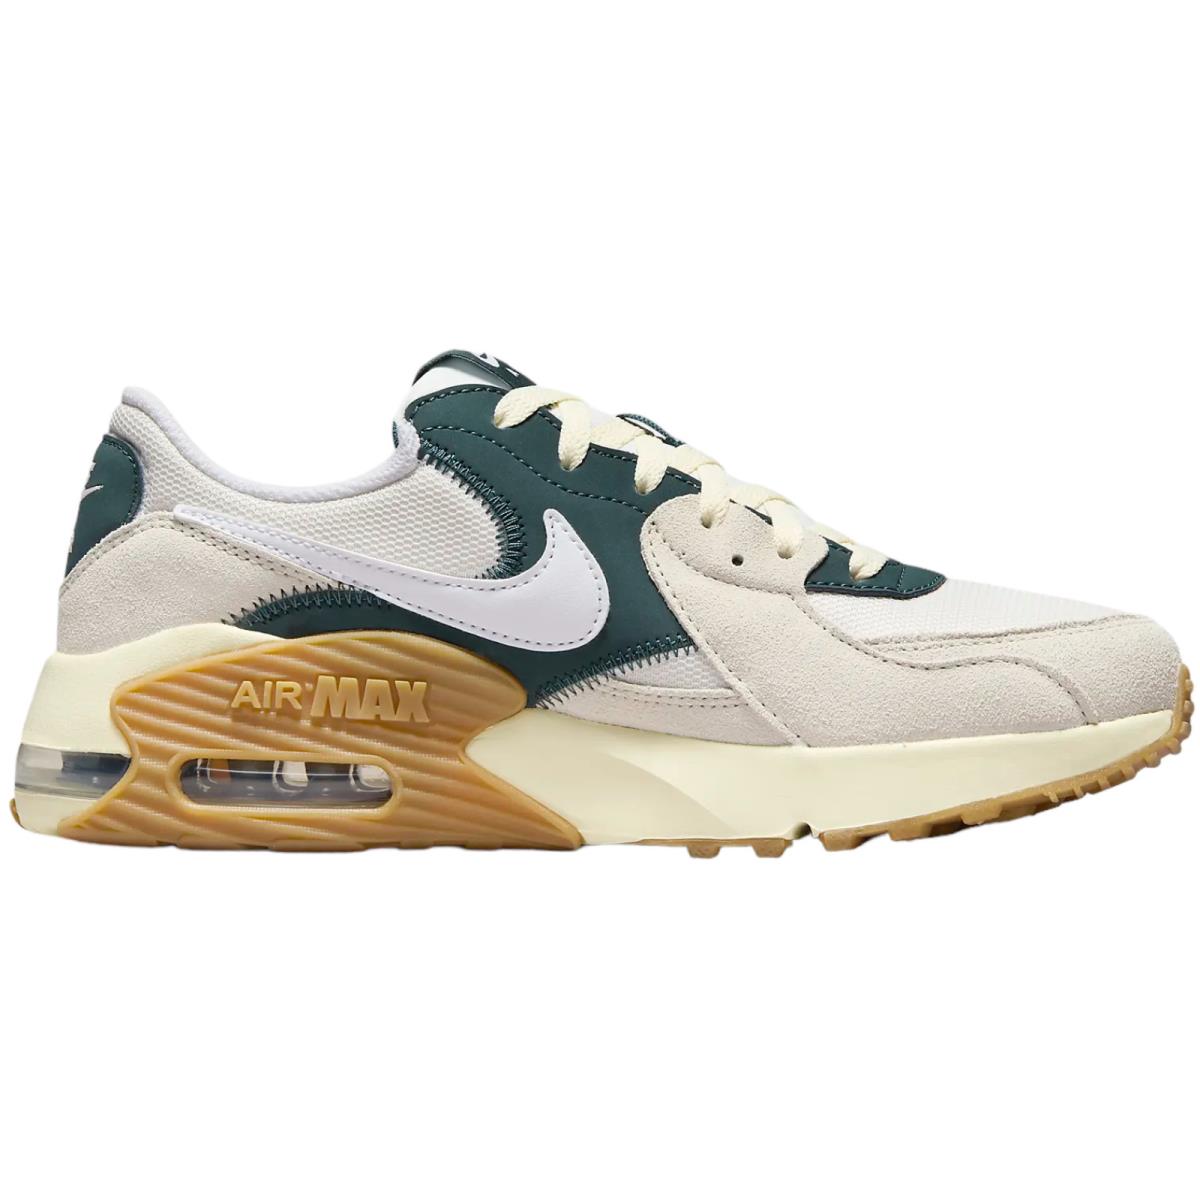 Nike Air Max Excee Men`s Casual Shoes All Colors US Sizes 7-14 Sail/Light Orewood Brown/Gum Medium Brown/Jungle